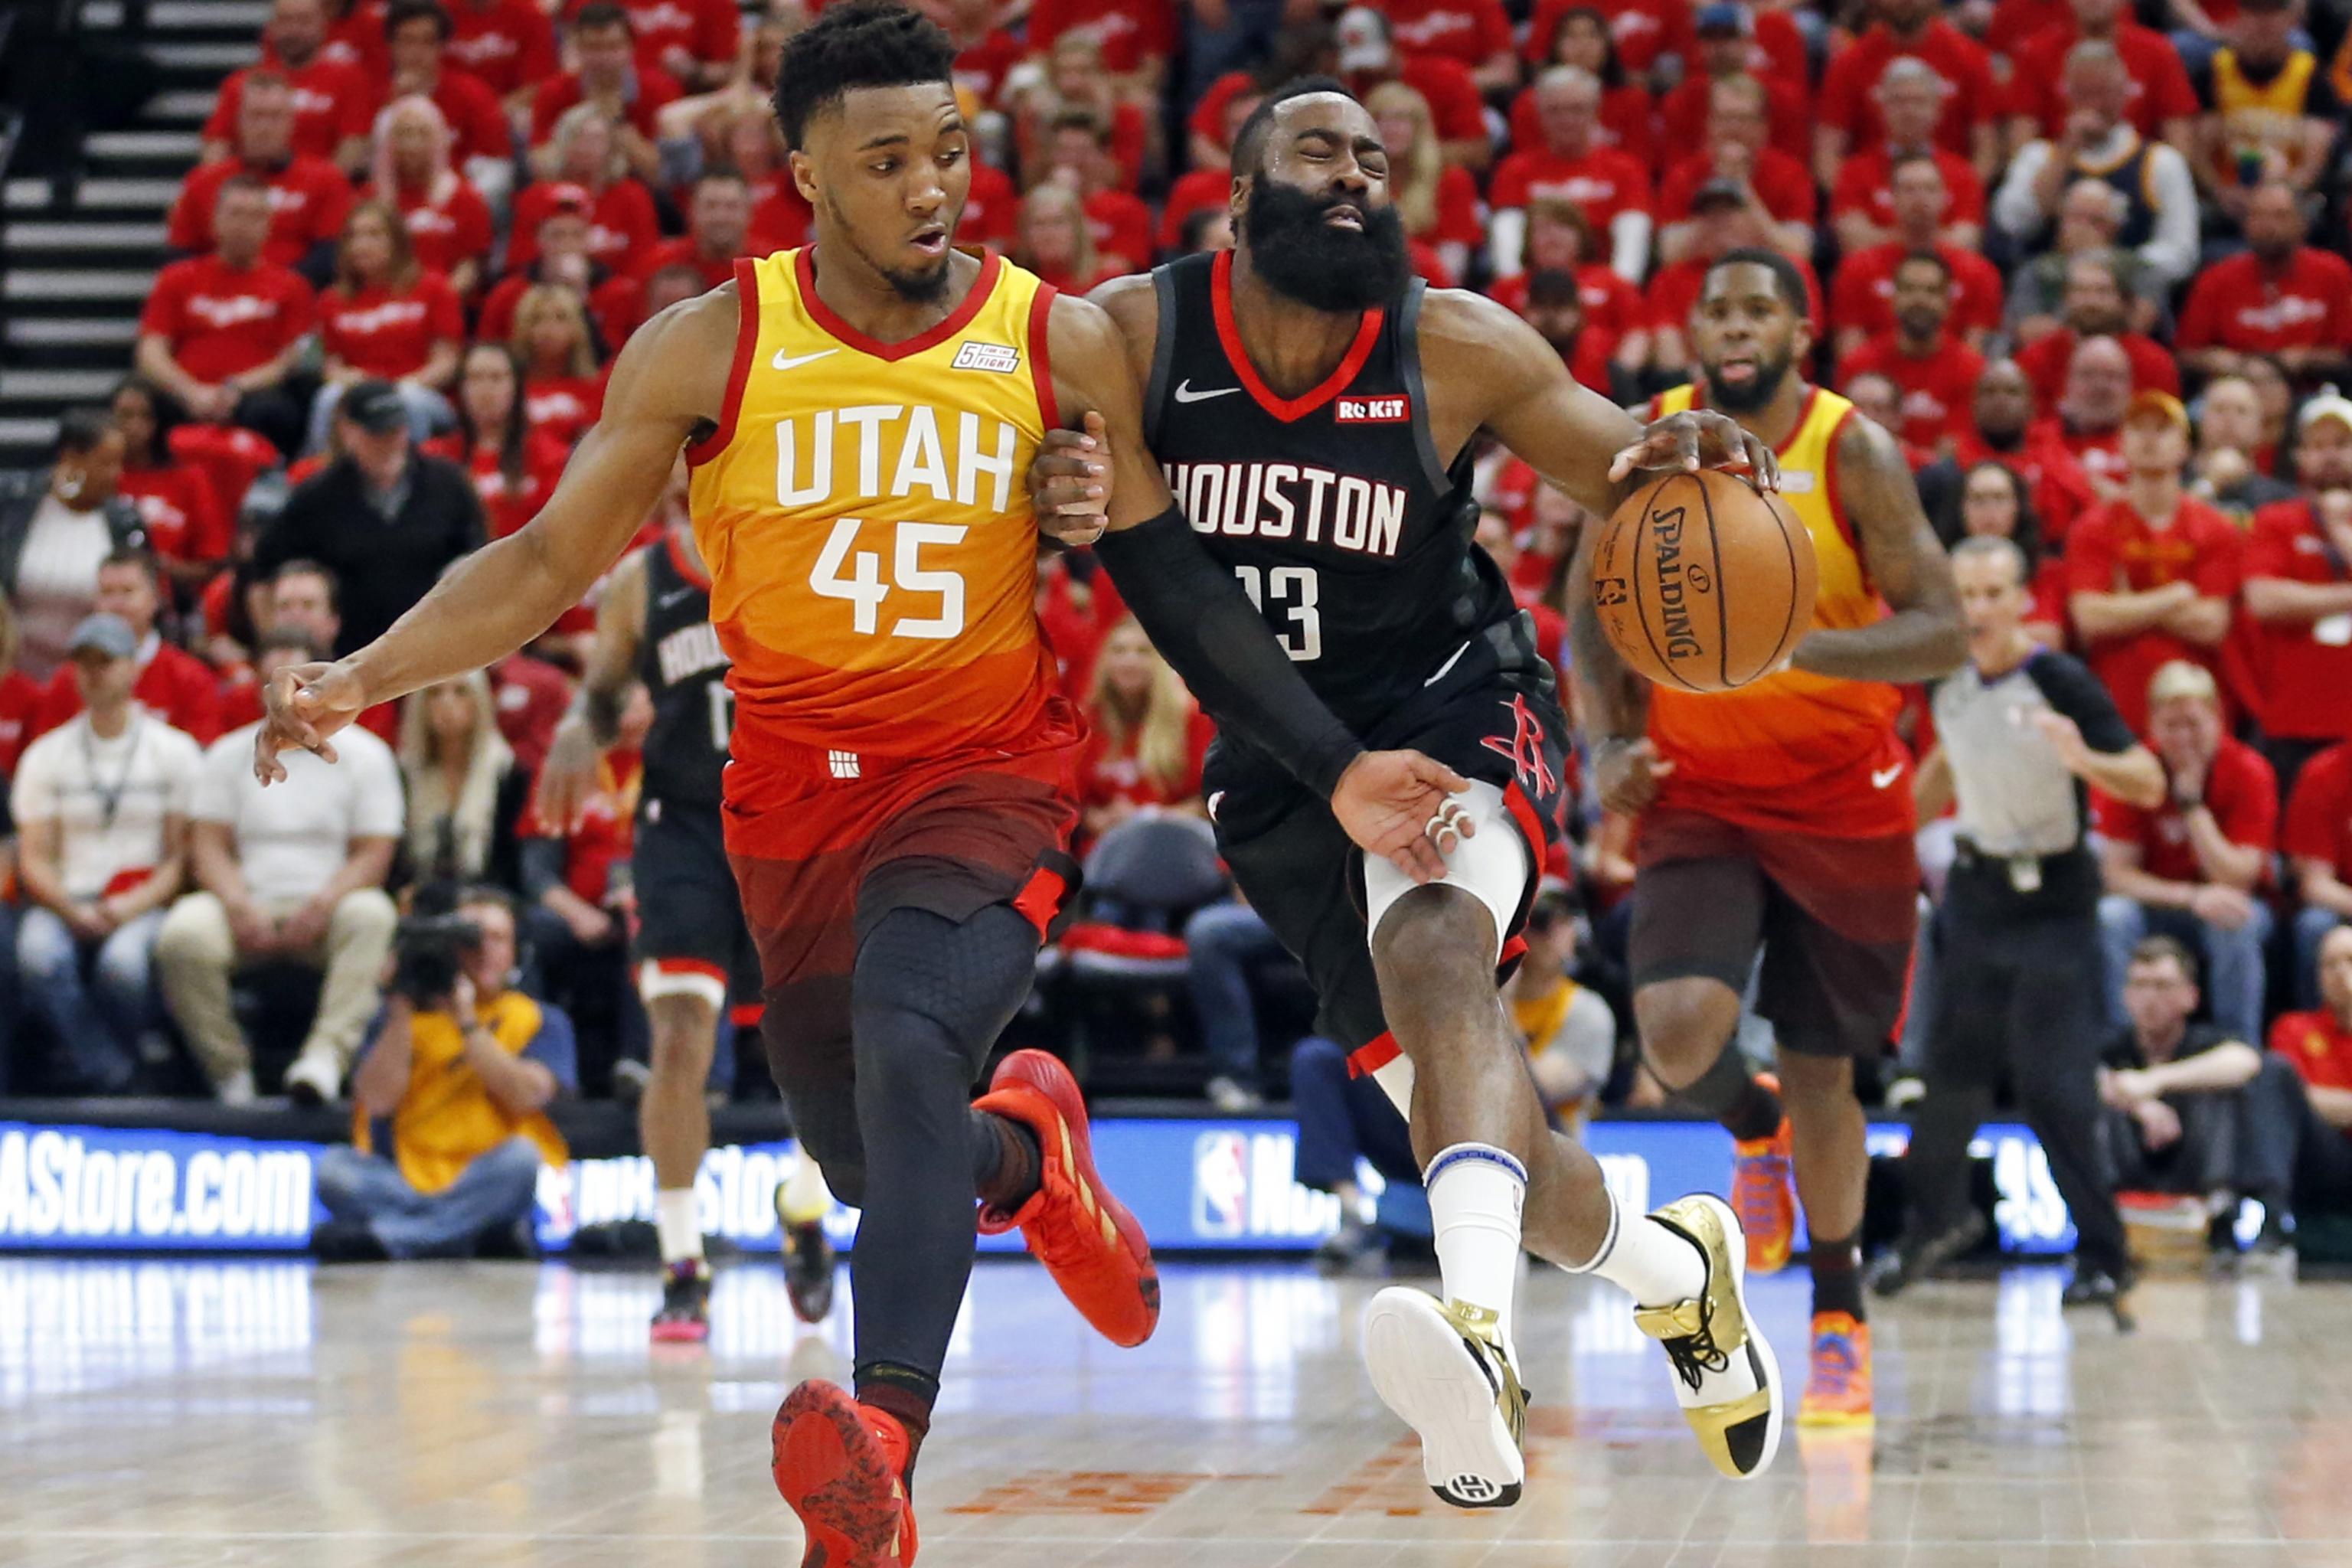 Nba Playoffs 2019 Updated Championship Odds Bracket Picture And Predictions Bleacher Report Latest News Videos And Highlights